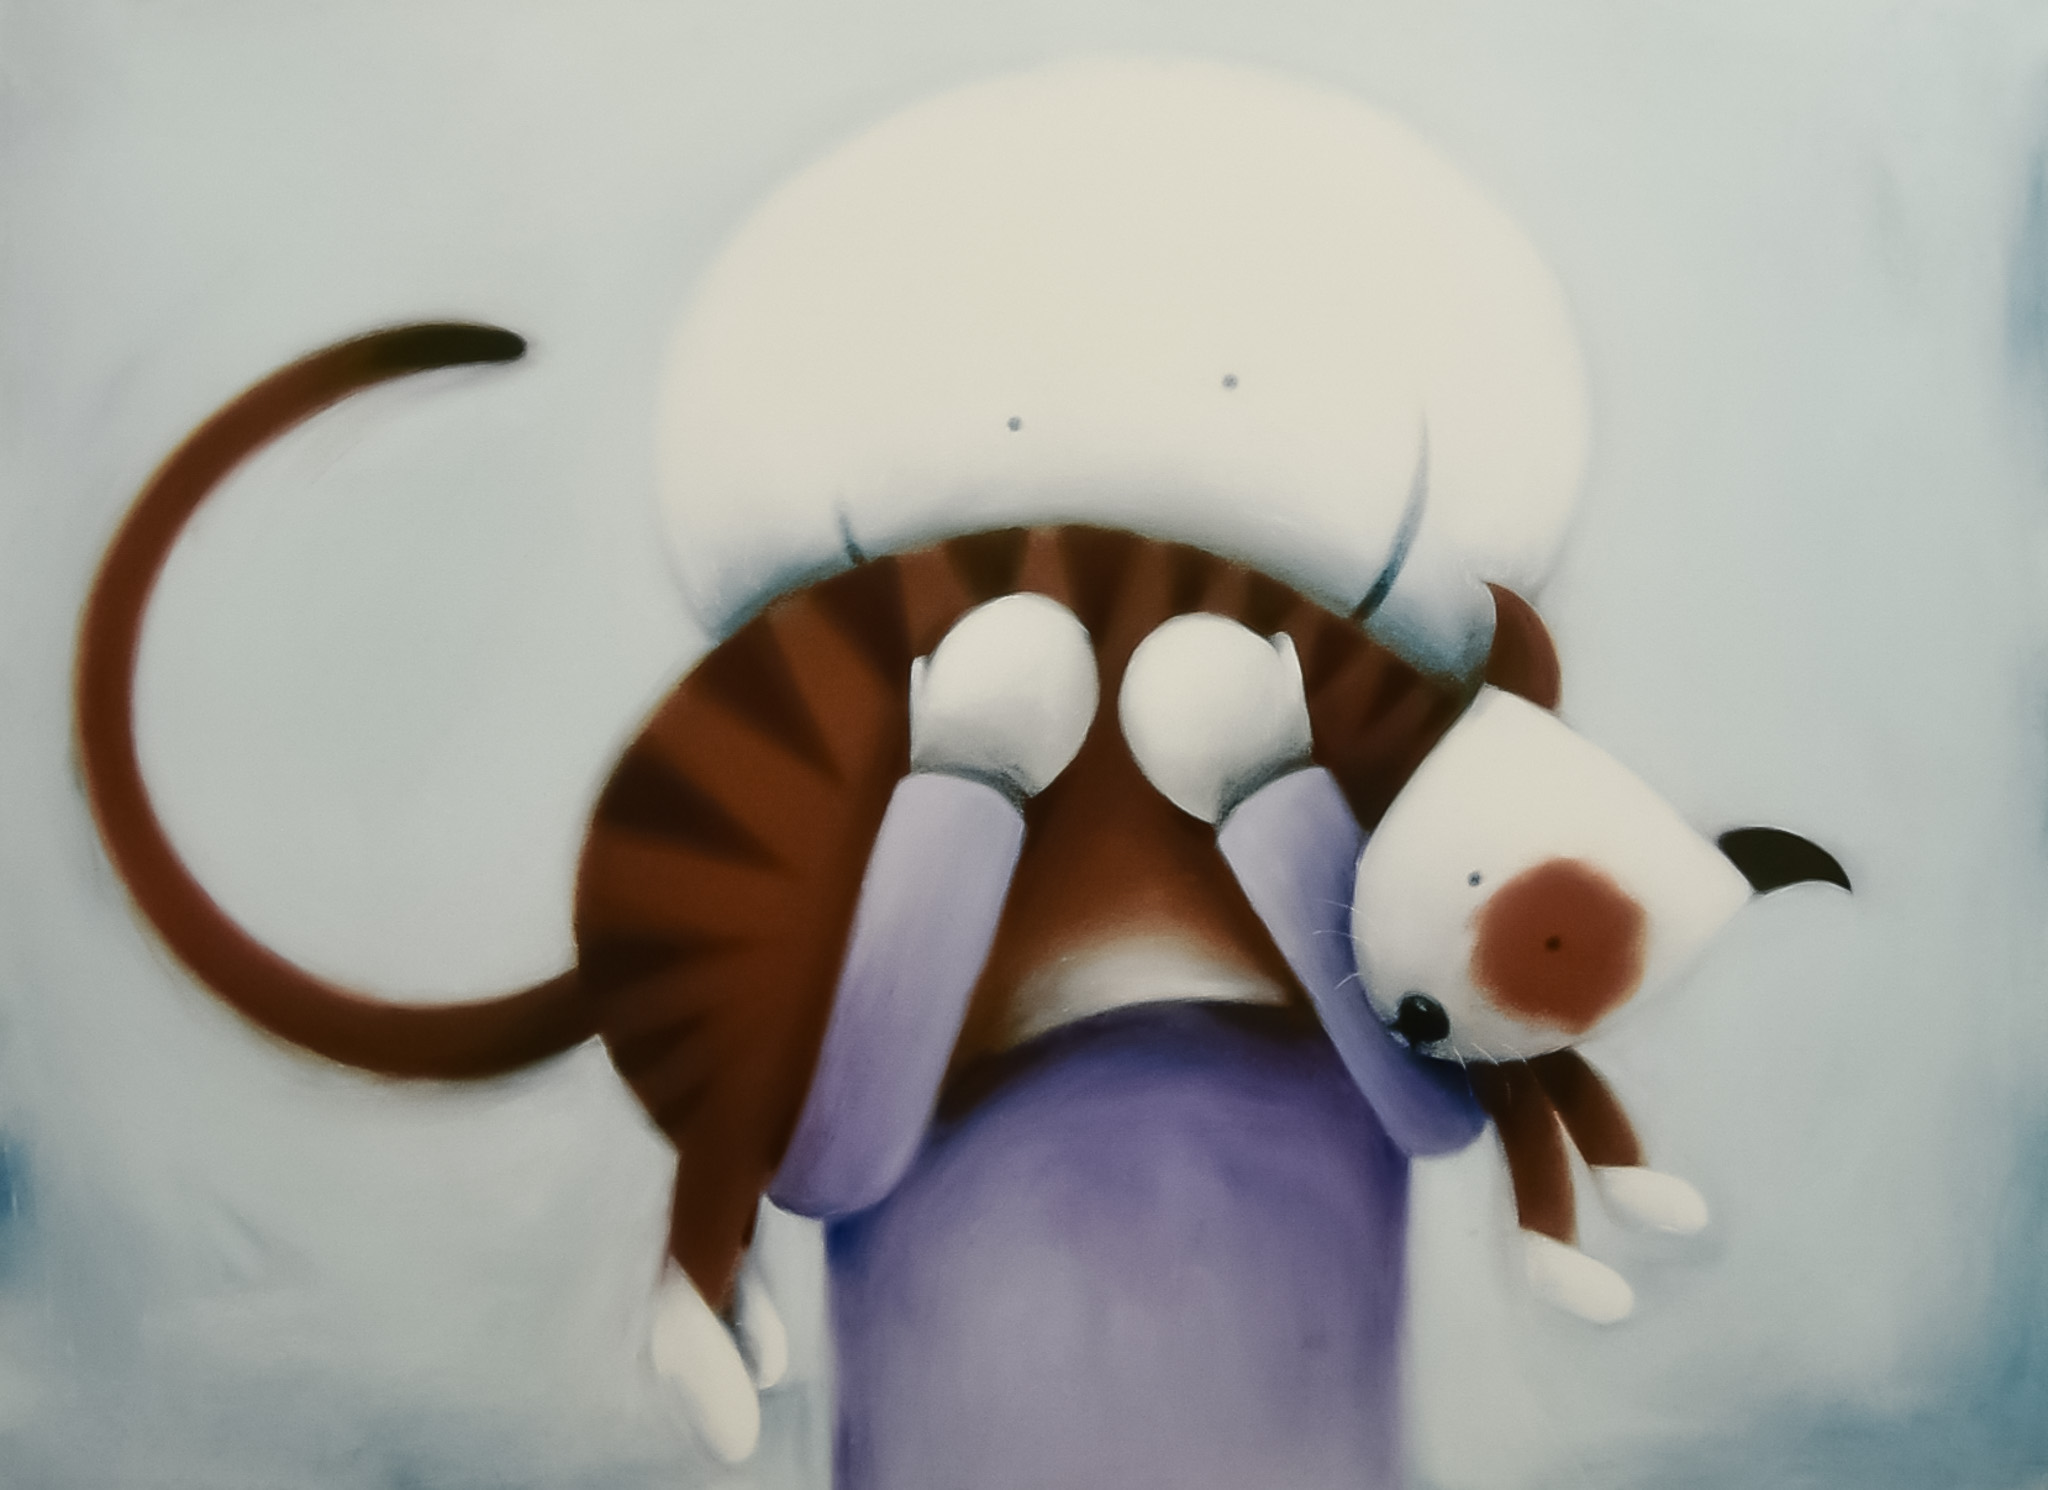 ***Doug Hyde (Born 1972) - Limited Edition Coloured Print - "Tiger", No. 159/495, signed and titled,